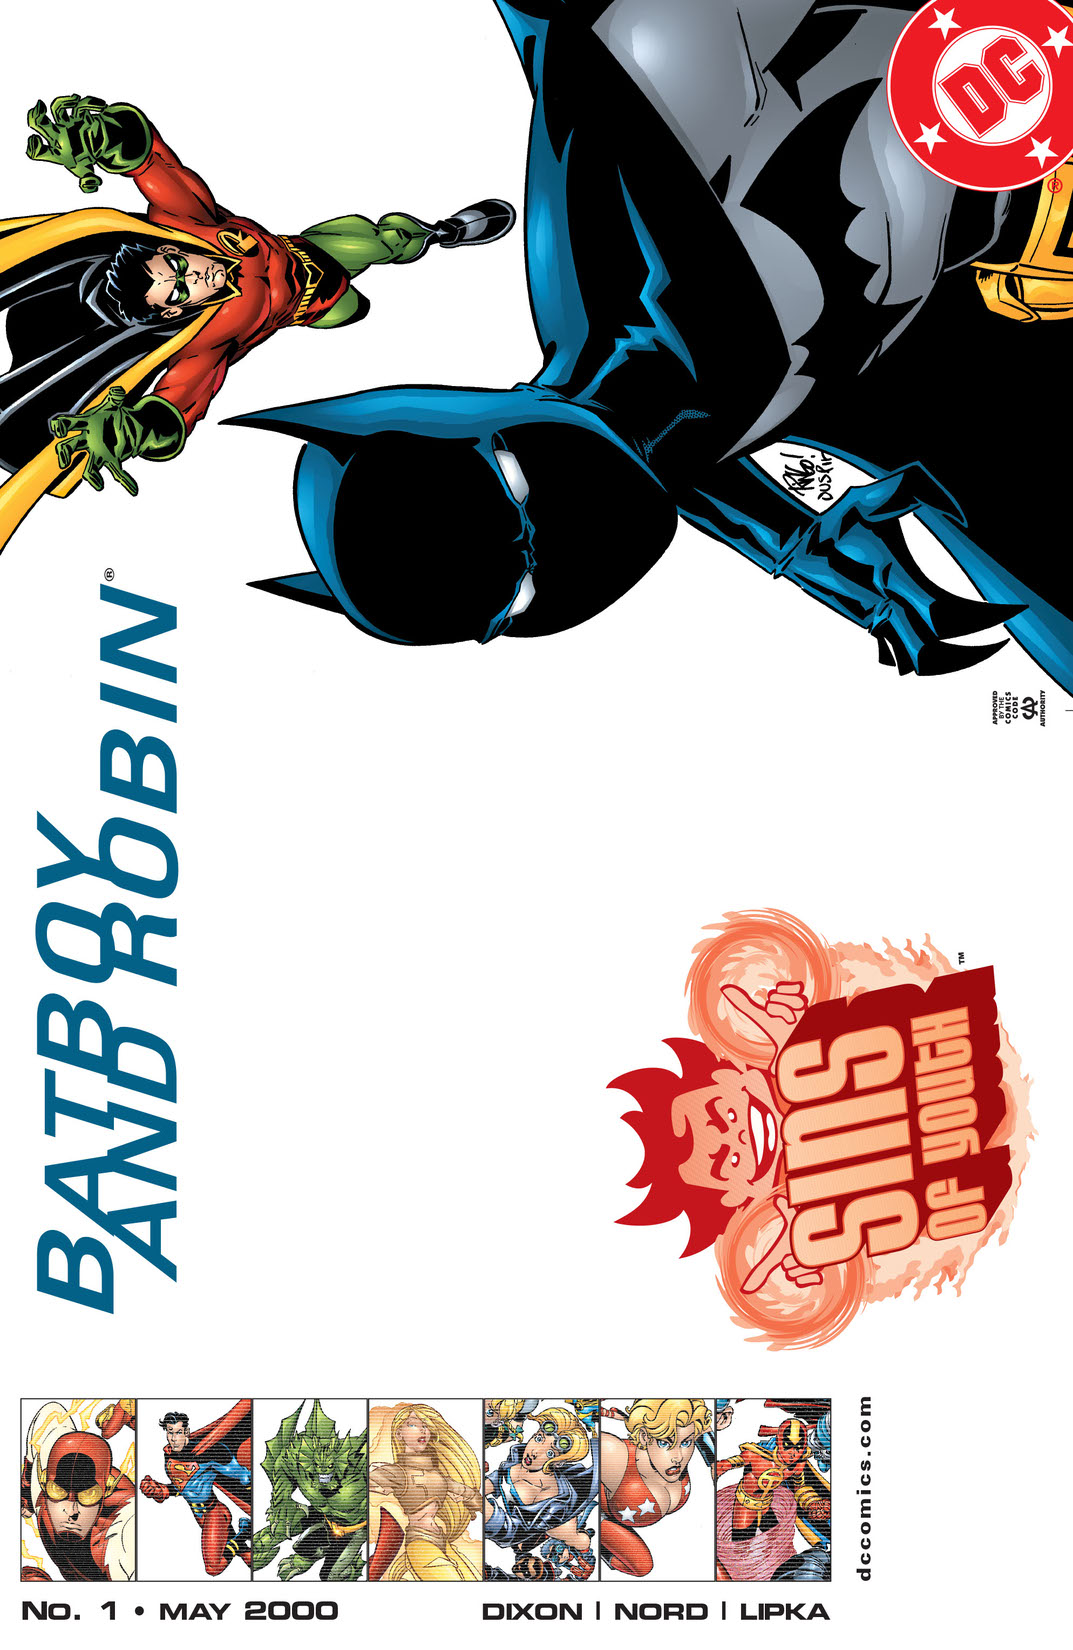 Sins of Youth: Batboy and Robin #1 preview images